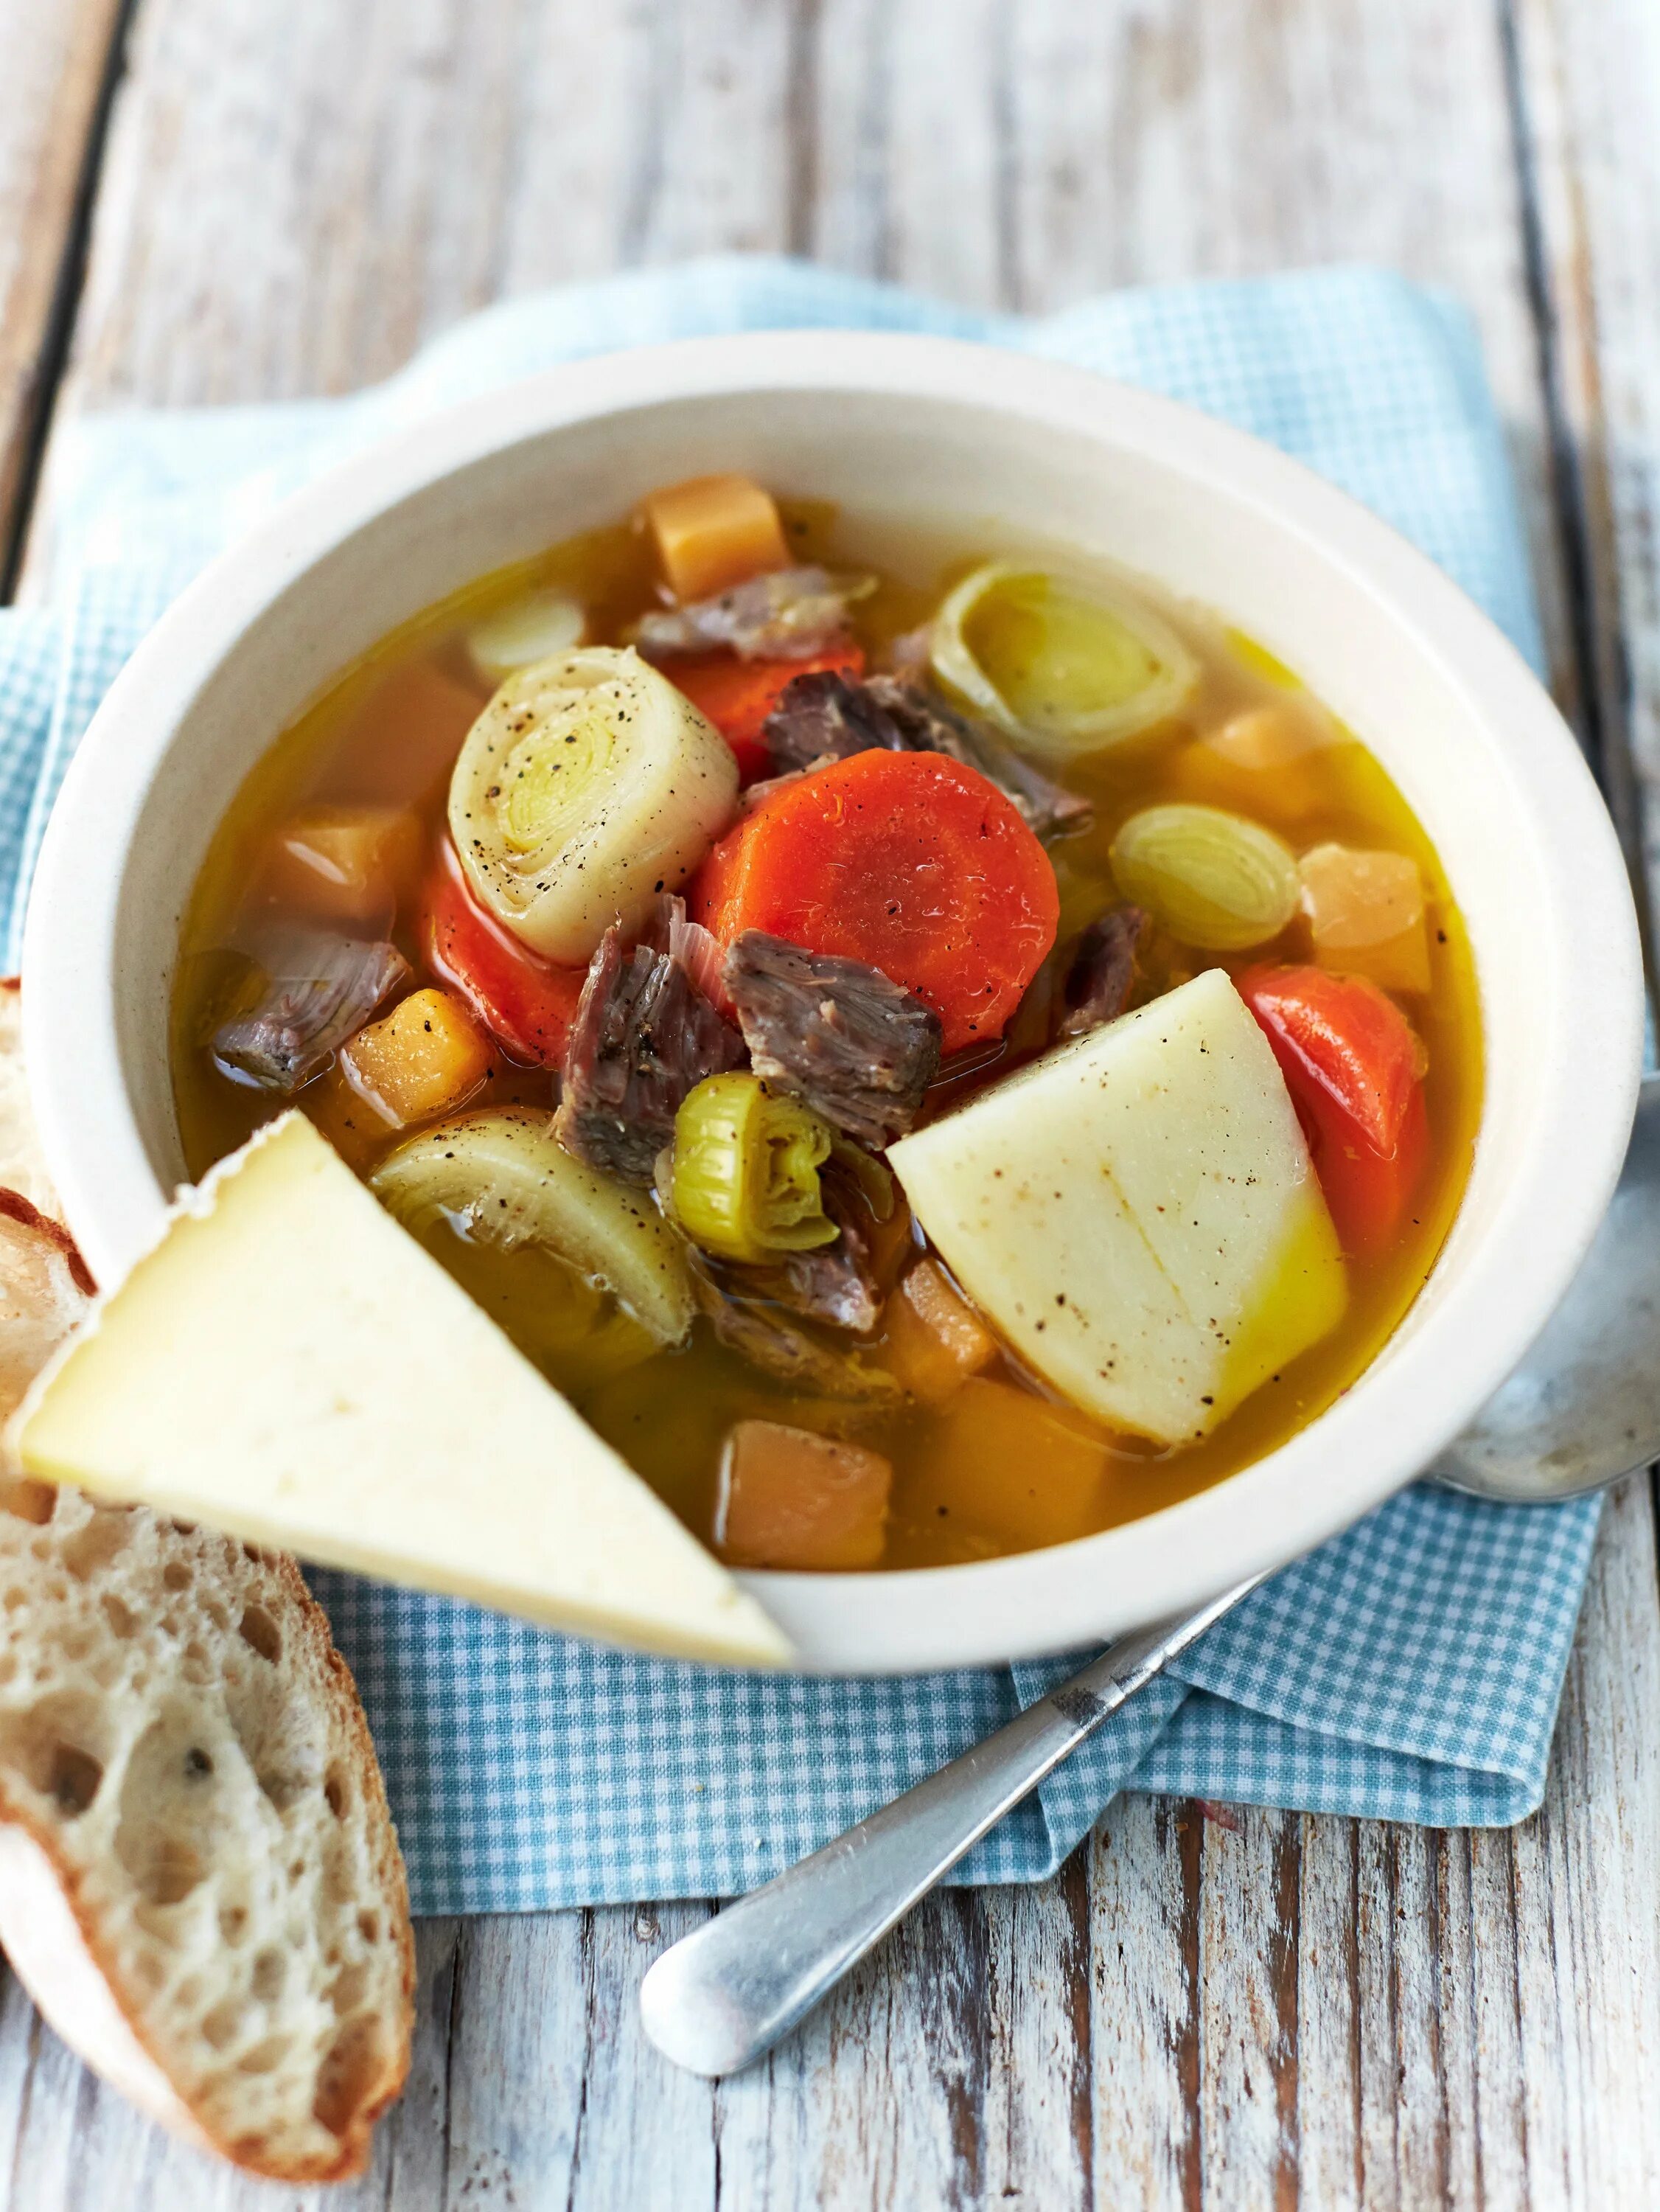 Cawl Cennin. Welsh Cawl. Cawl Wales. Welsh Cawl Stew. Recipes of dishes